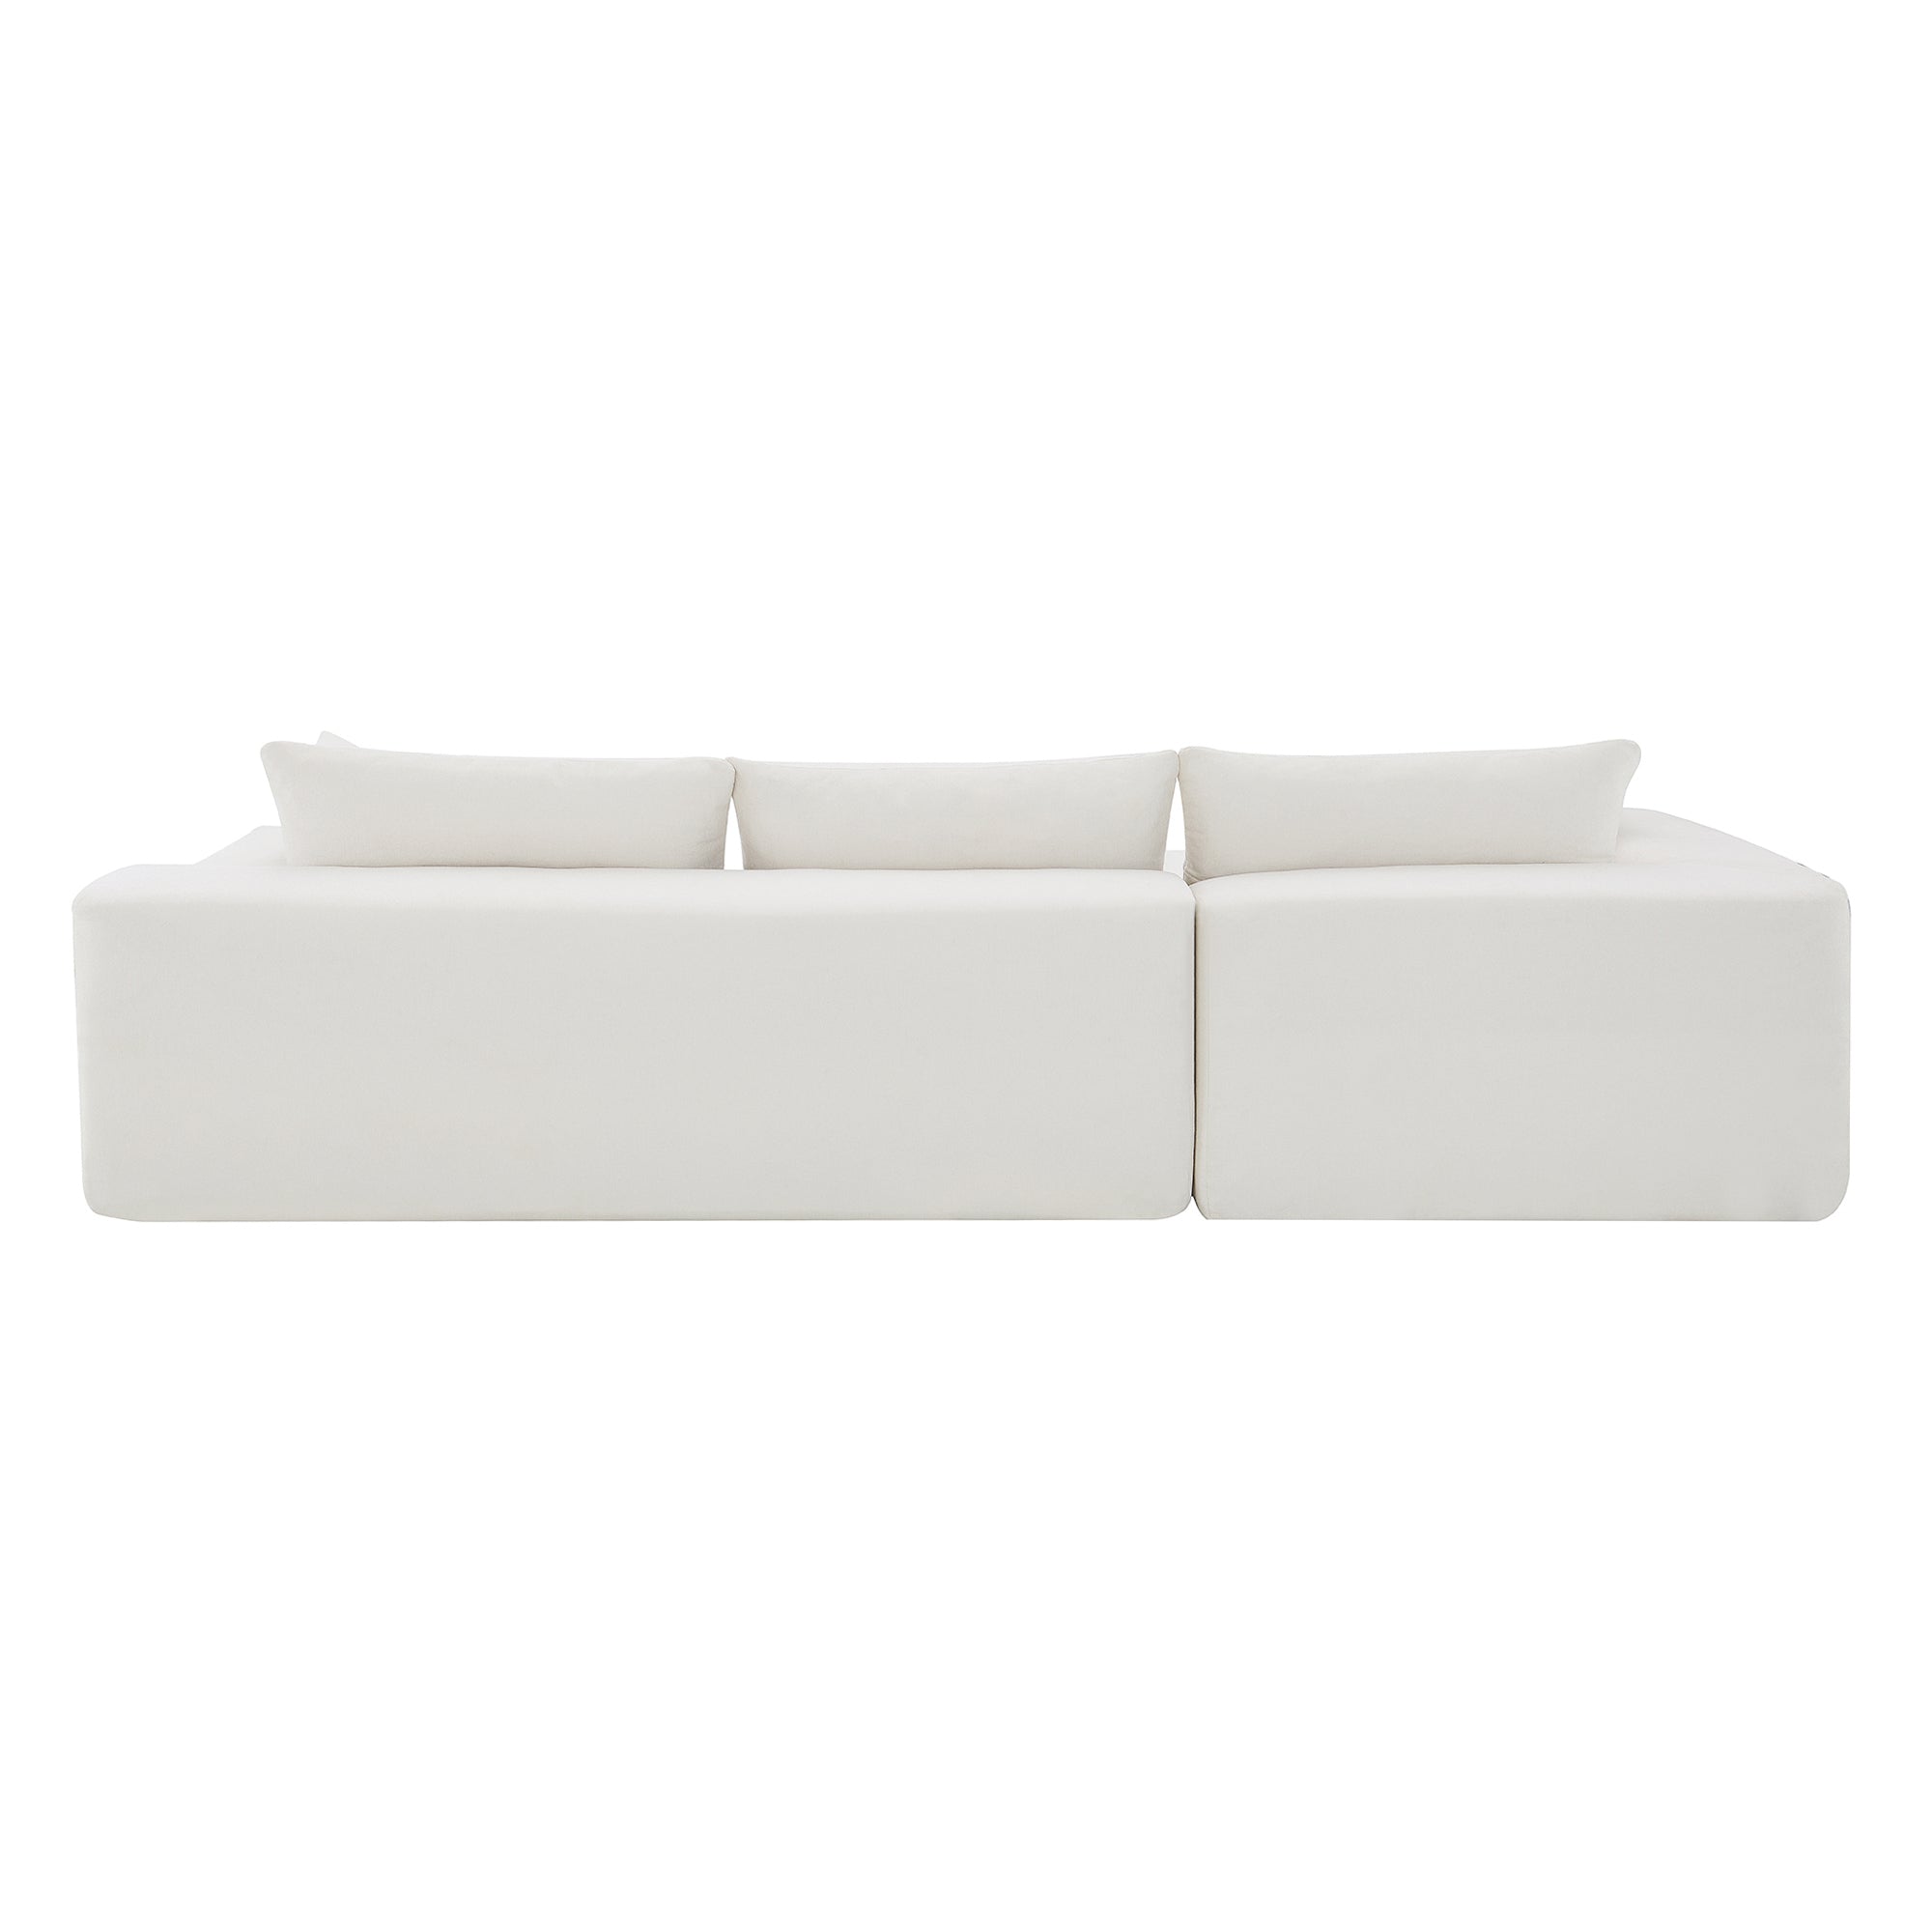 Cozy White L-Shape Chenille Sectional - Modern Modular Sleeper Sofa-Stationary Sectionals-American Furniture Outlet